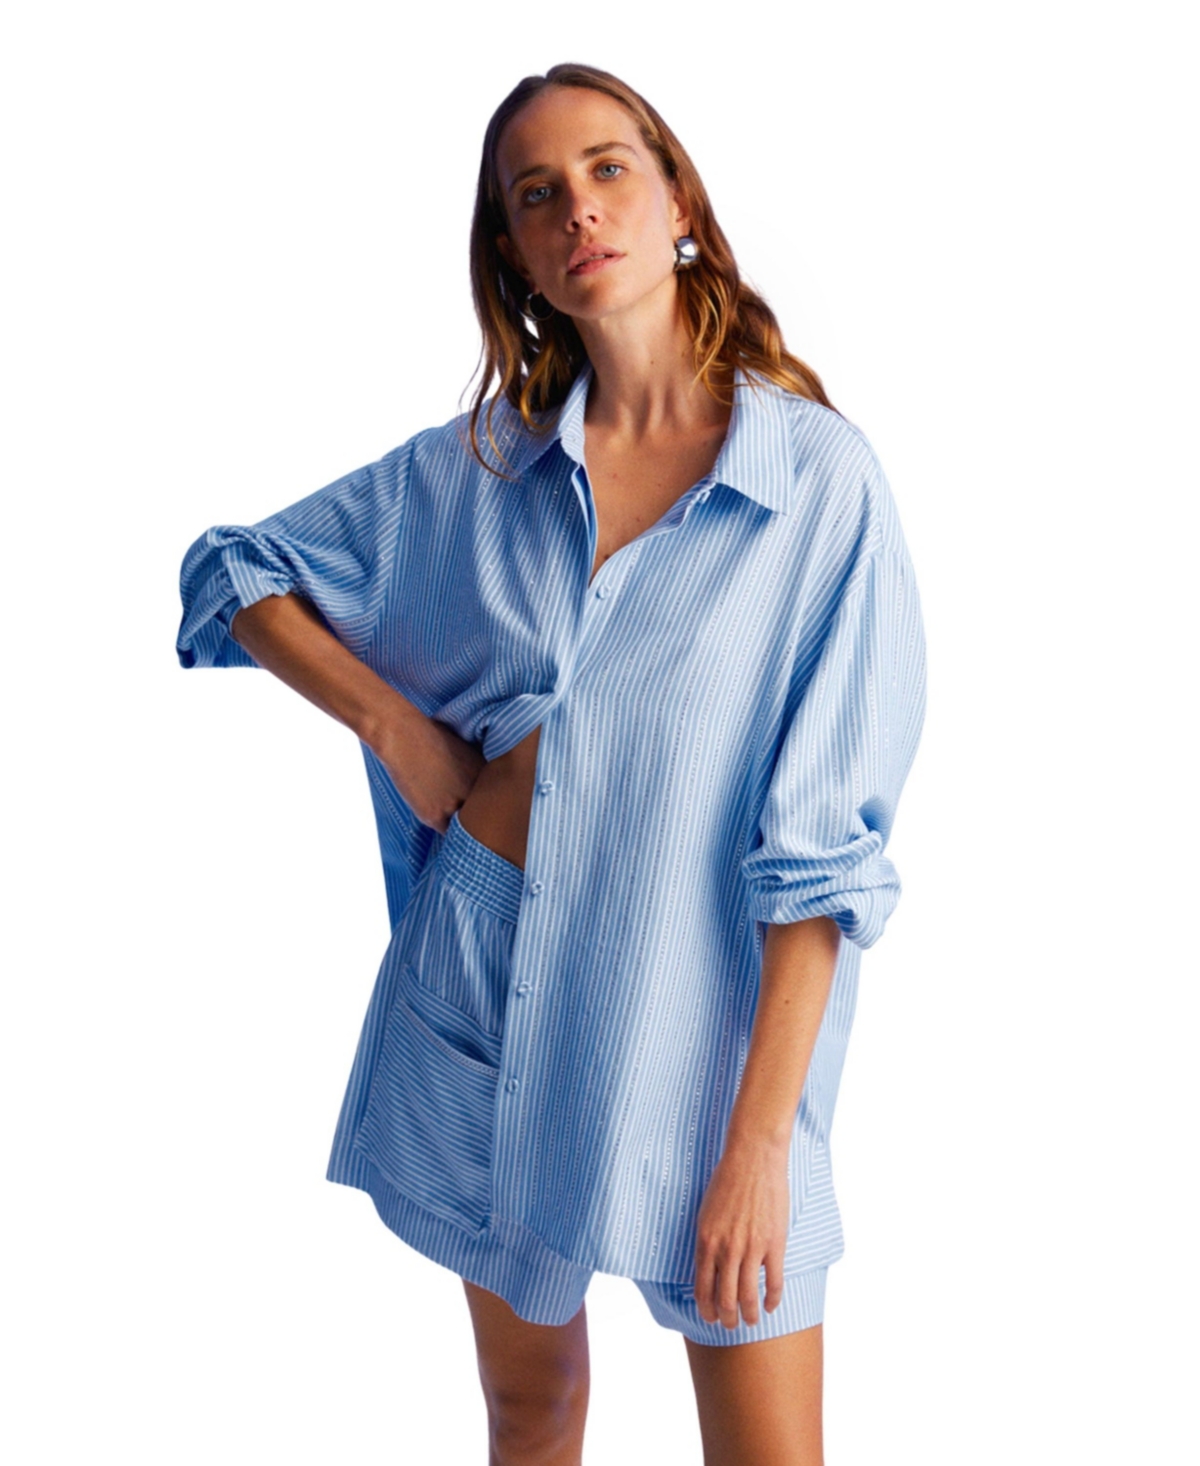 Women's Stone Embroidered Shirt - Blue